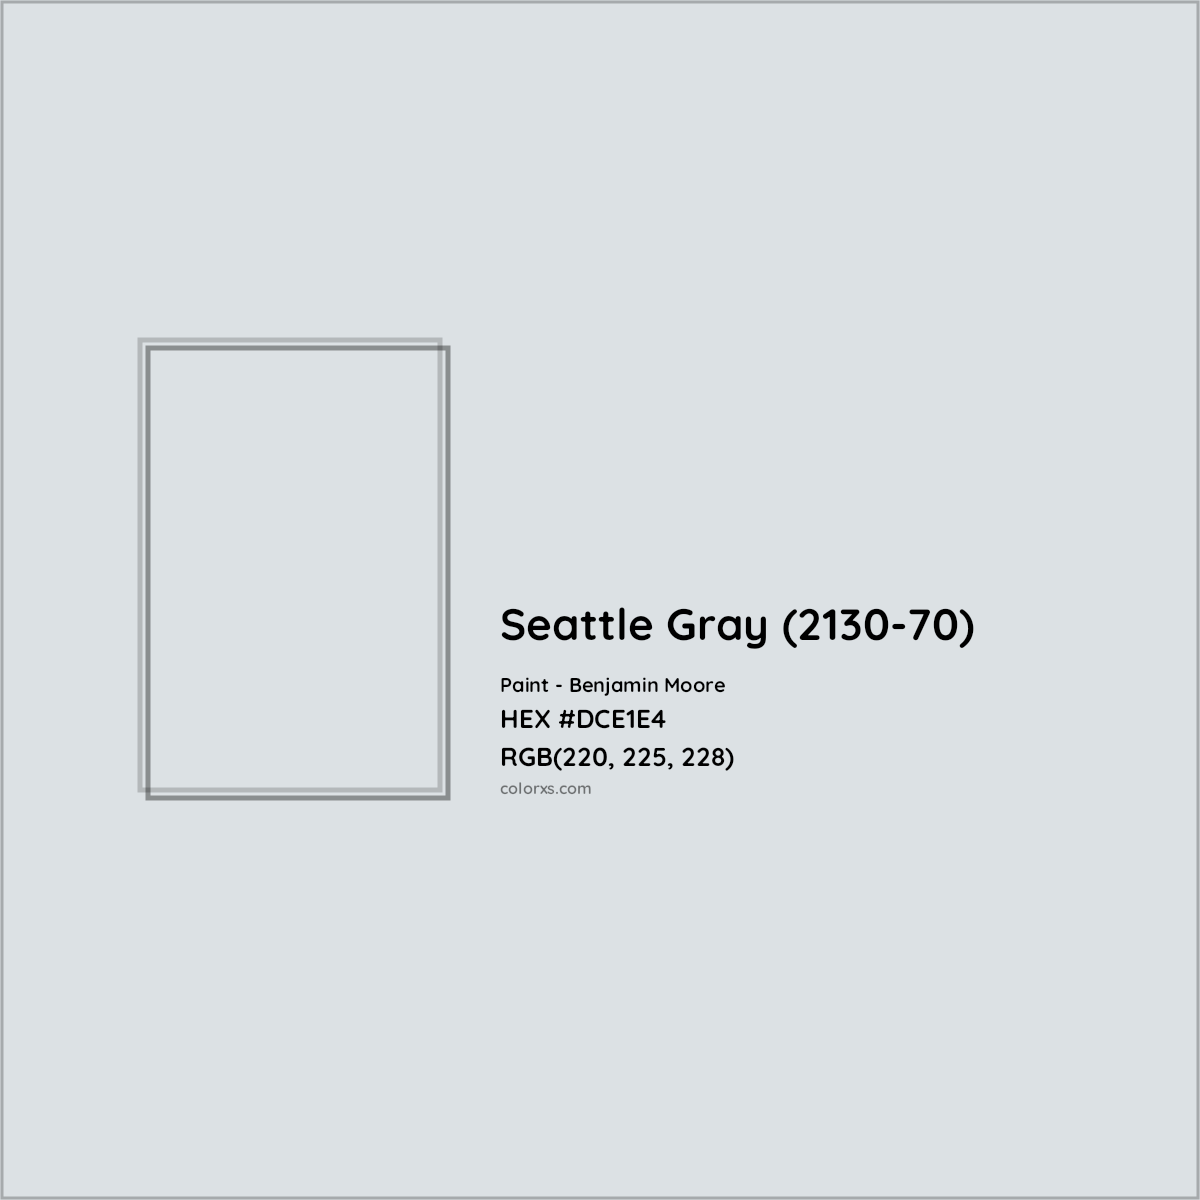 HEX #DCE1E4 Seattle Gray (2130-70) Paint Benjamin Moore - Color Code